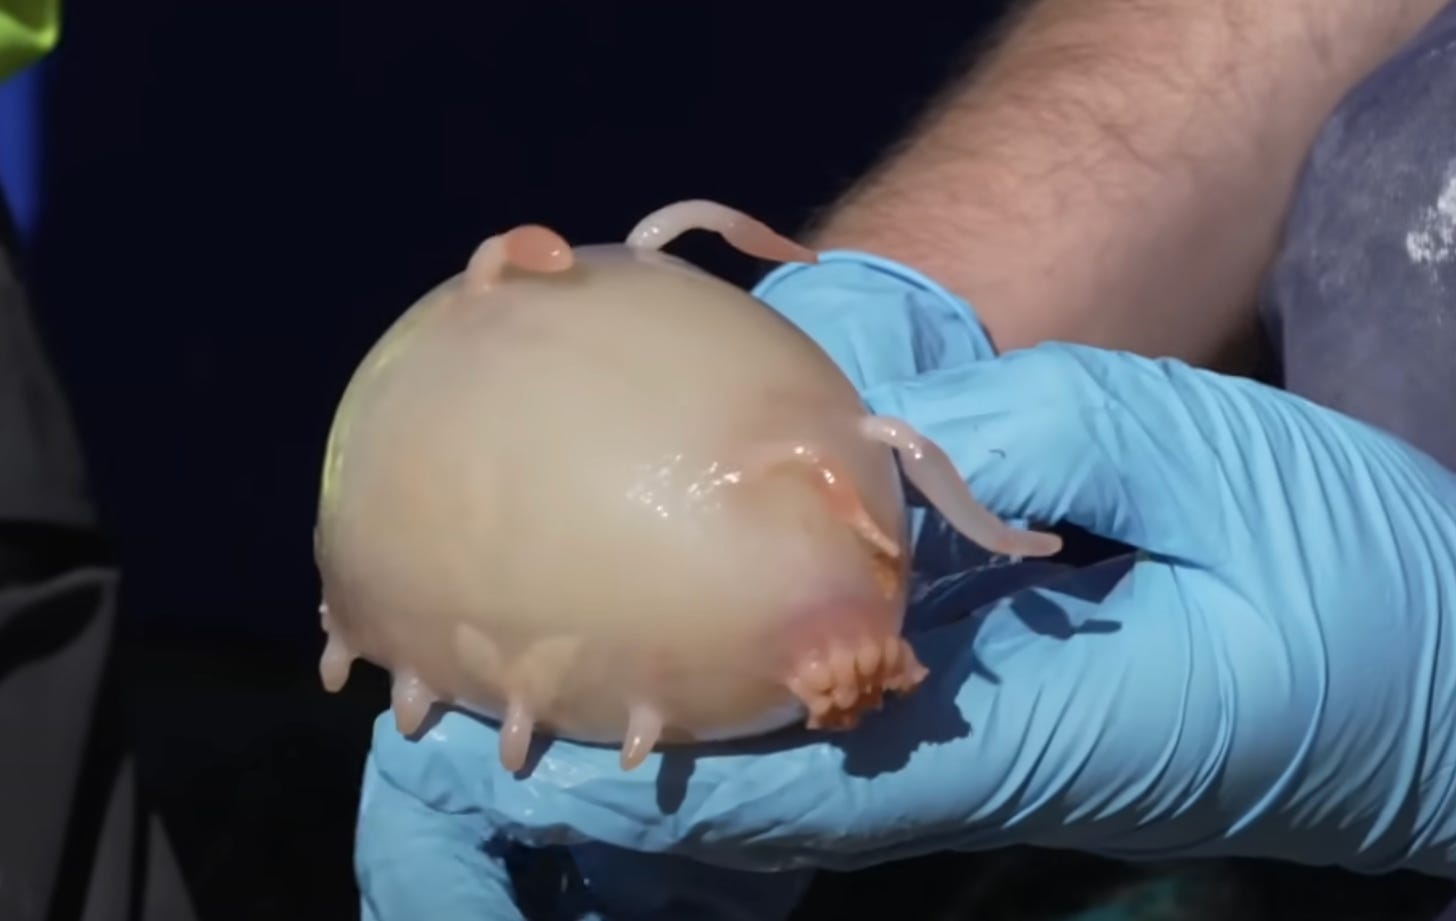 This thing is worse than the sea cucumber. A pair of blue rubber gloved hands are holding another inflatable looking peach item. It has 4 tiny leg teats on one side and 2 antenna on the top and 2 on its, what I can only assume, is its but. And then the butt has like a whole clump of teat feet. They look like a tiny mouth or b-hole. I hate it.